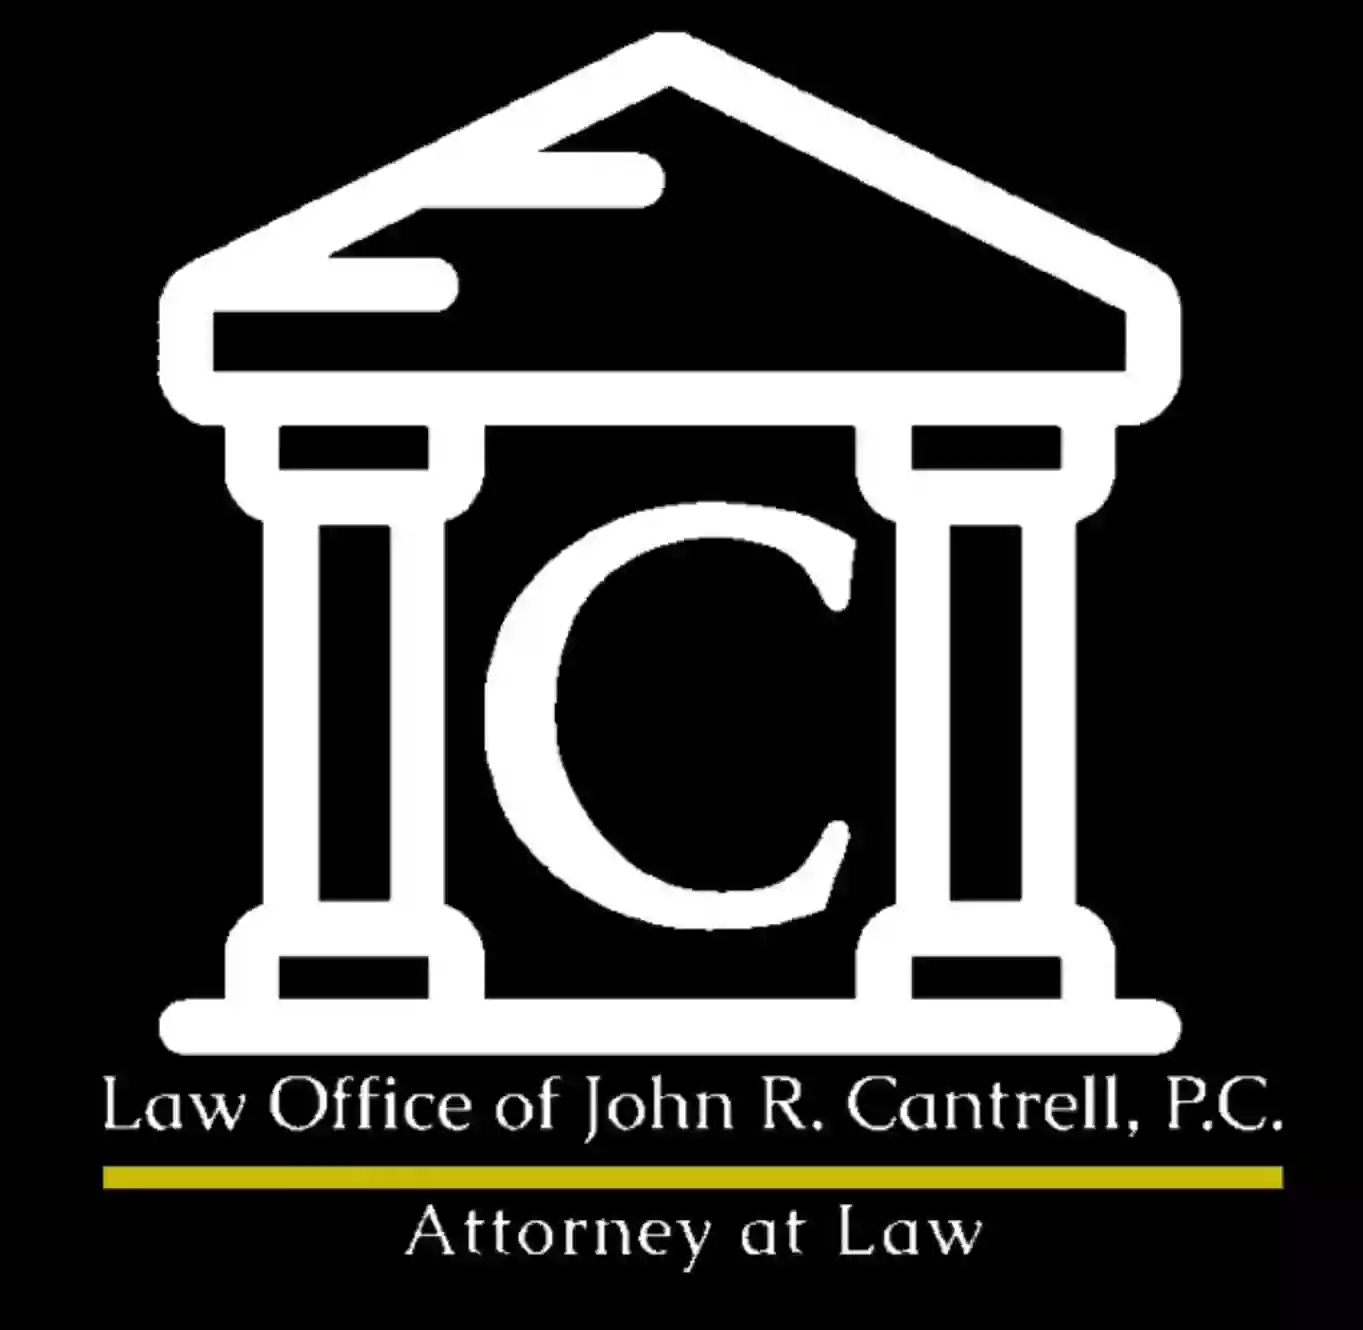 Law Office of John R. Cantrell